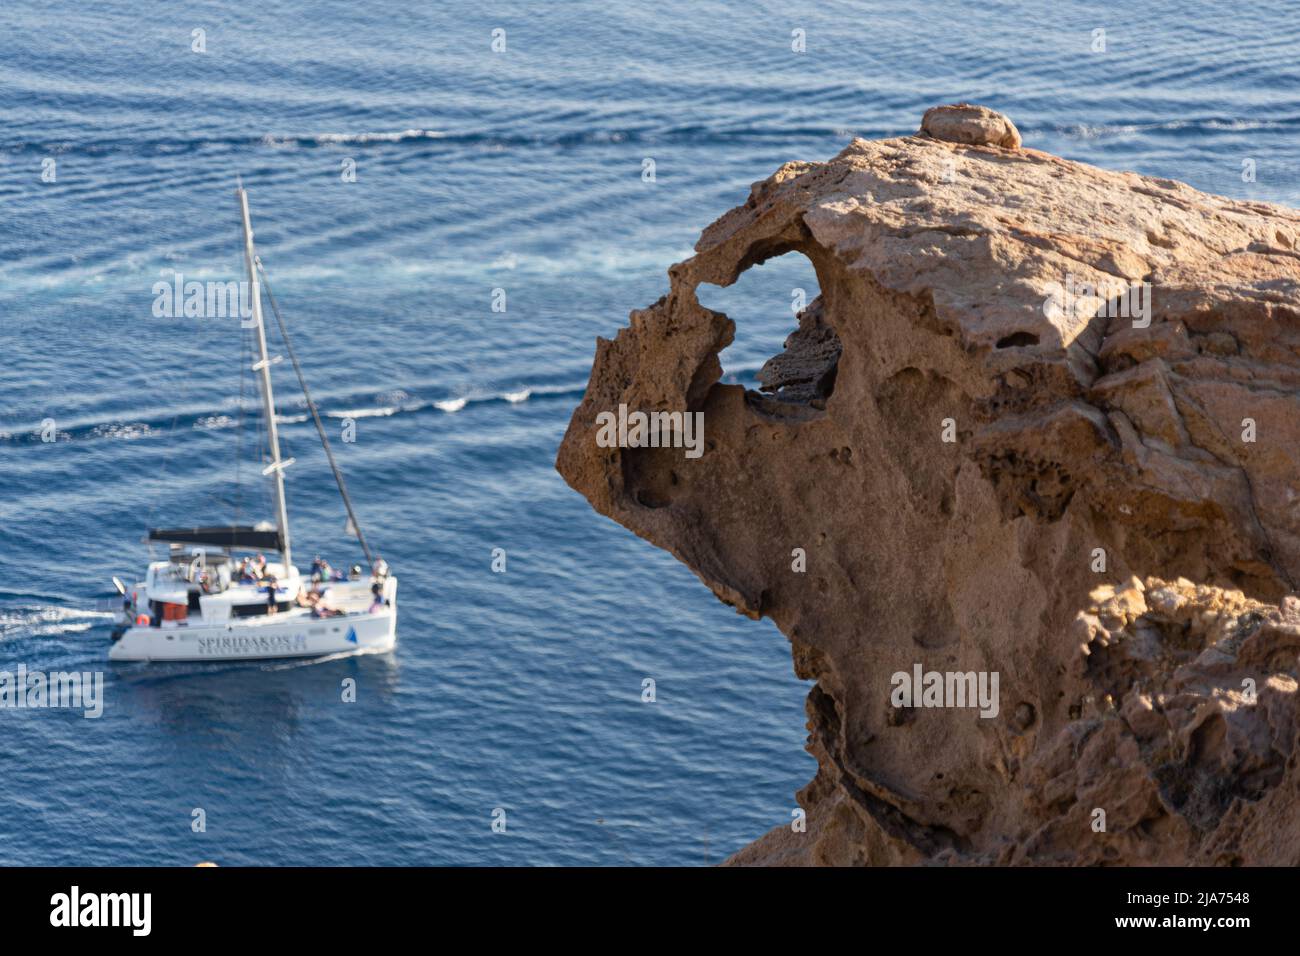 Santorini: A rocky promontory on the coast looks like a dragon's head snapping at the boats down below Stock Photo